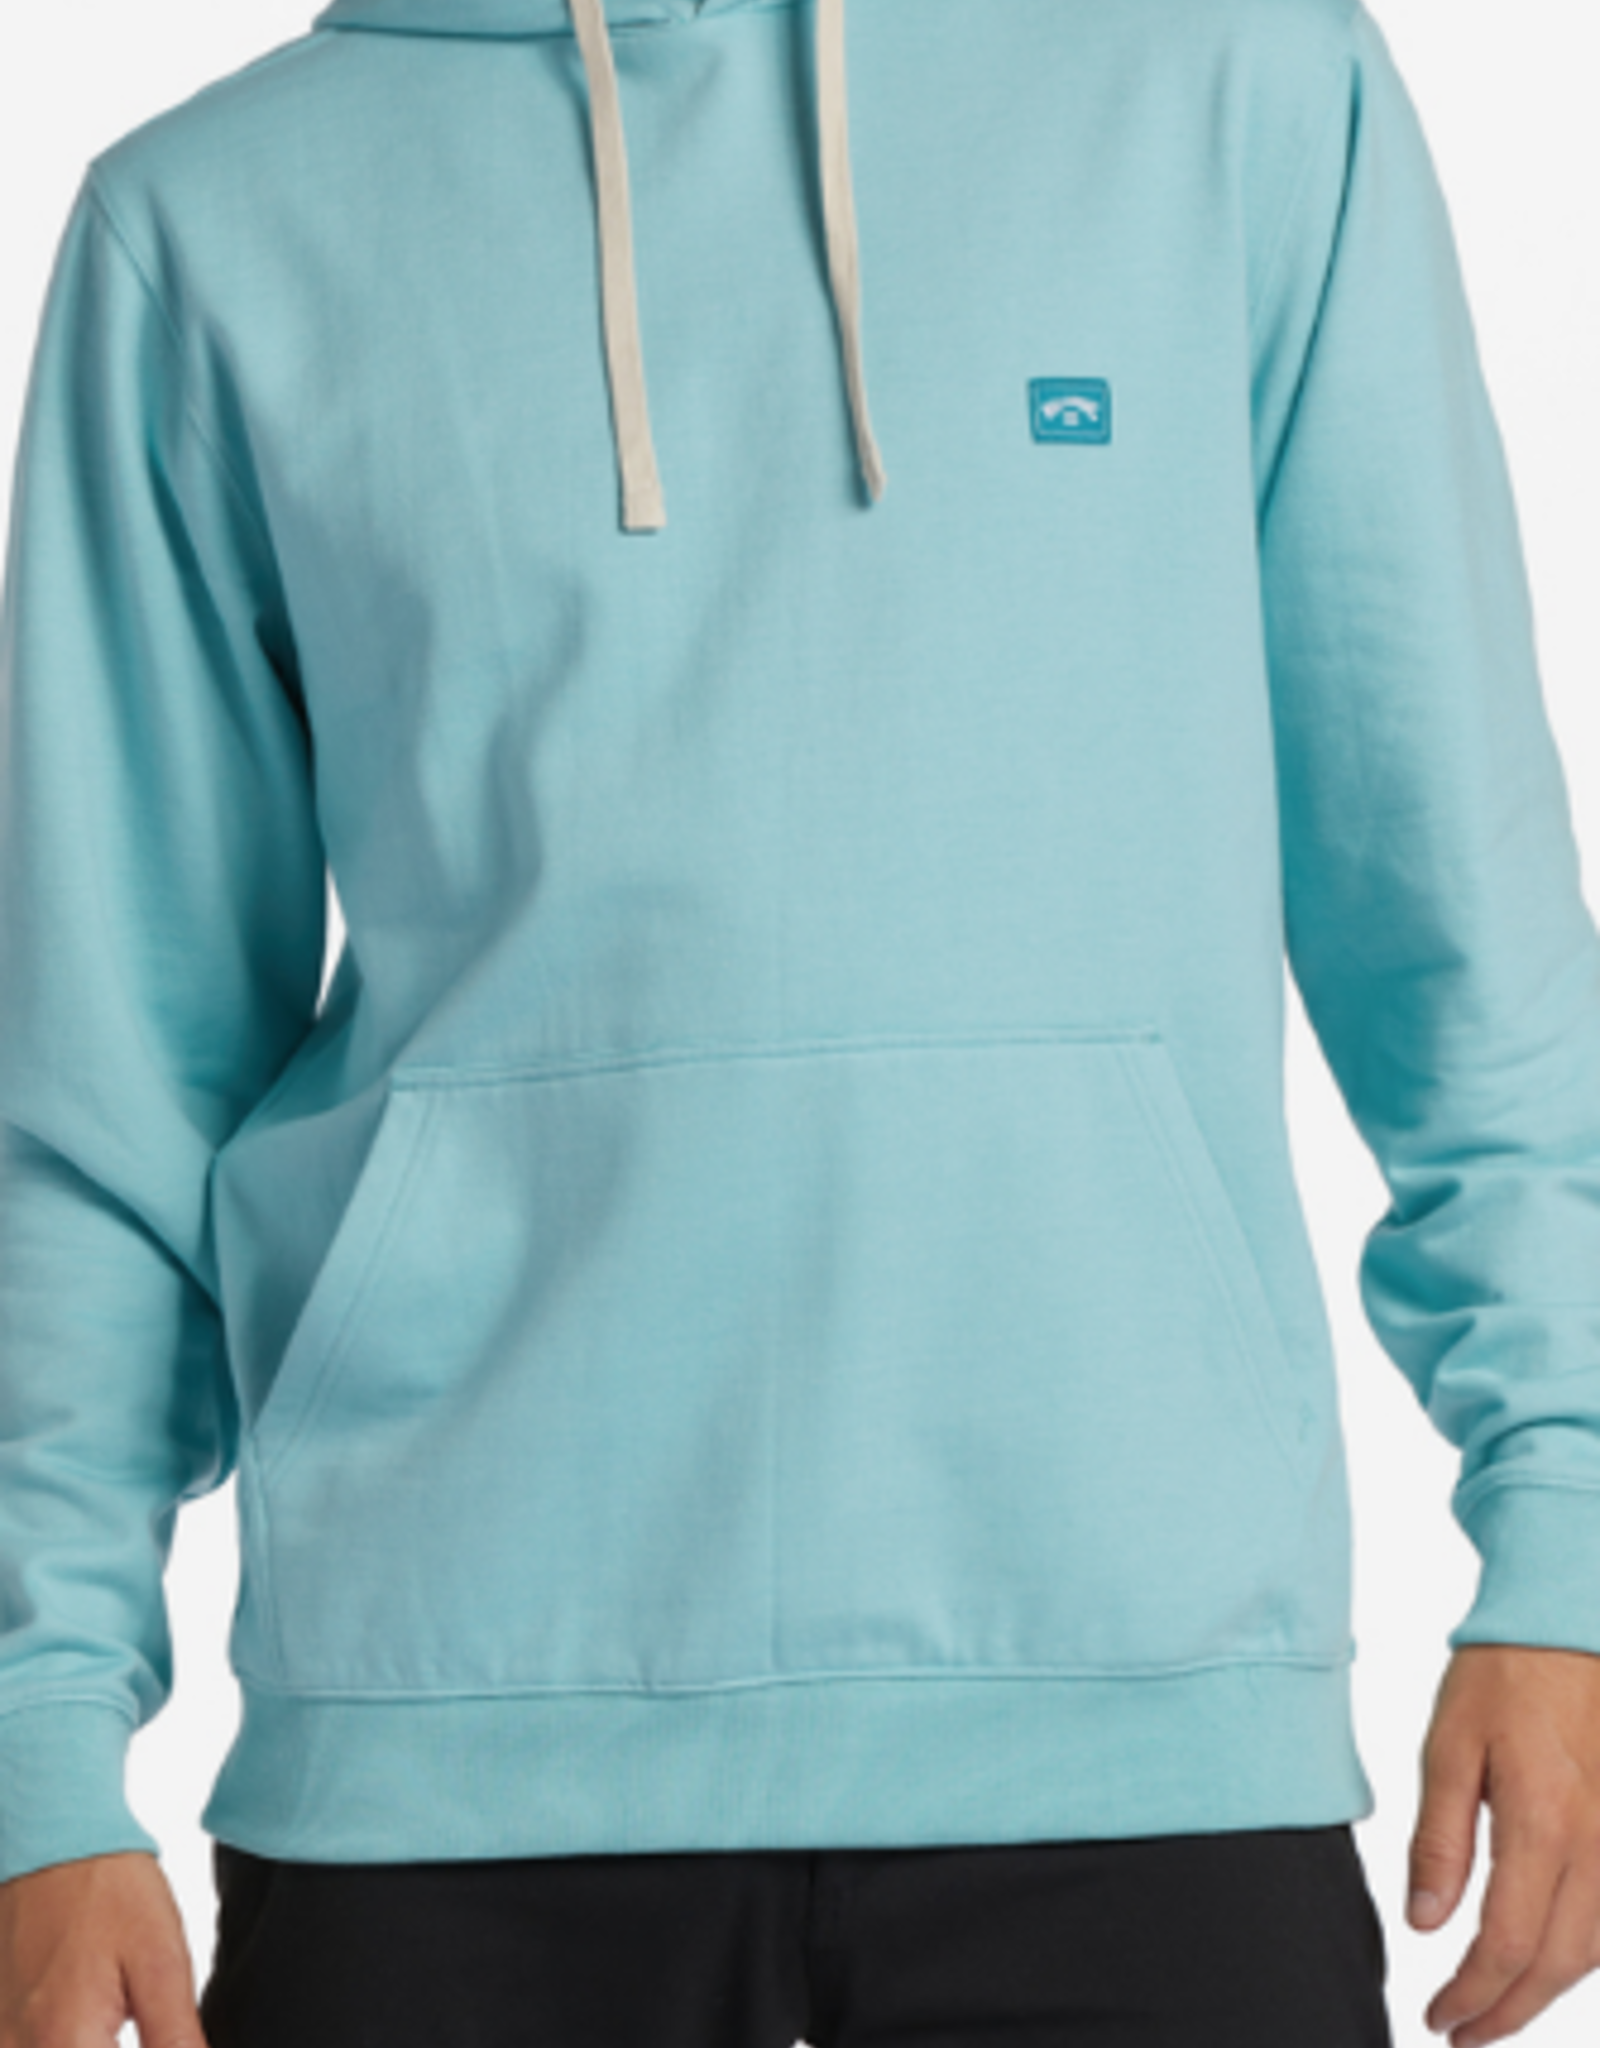 BILLABONG All Day Organic Pullover Hoodie